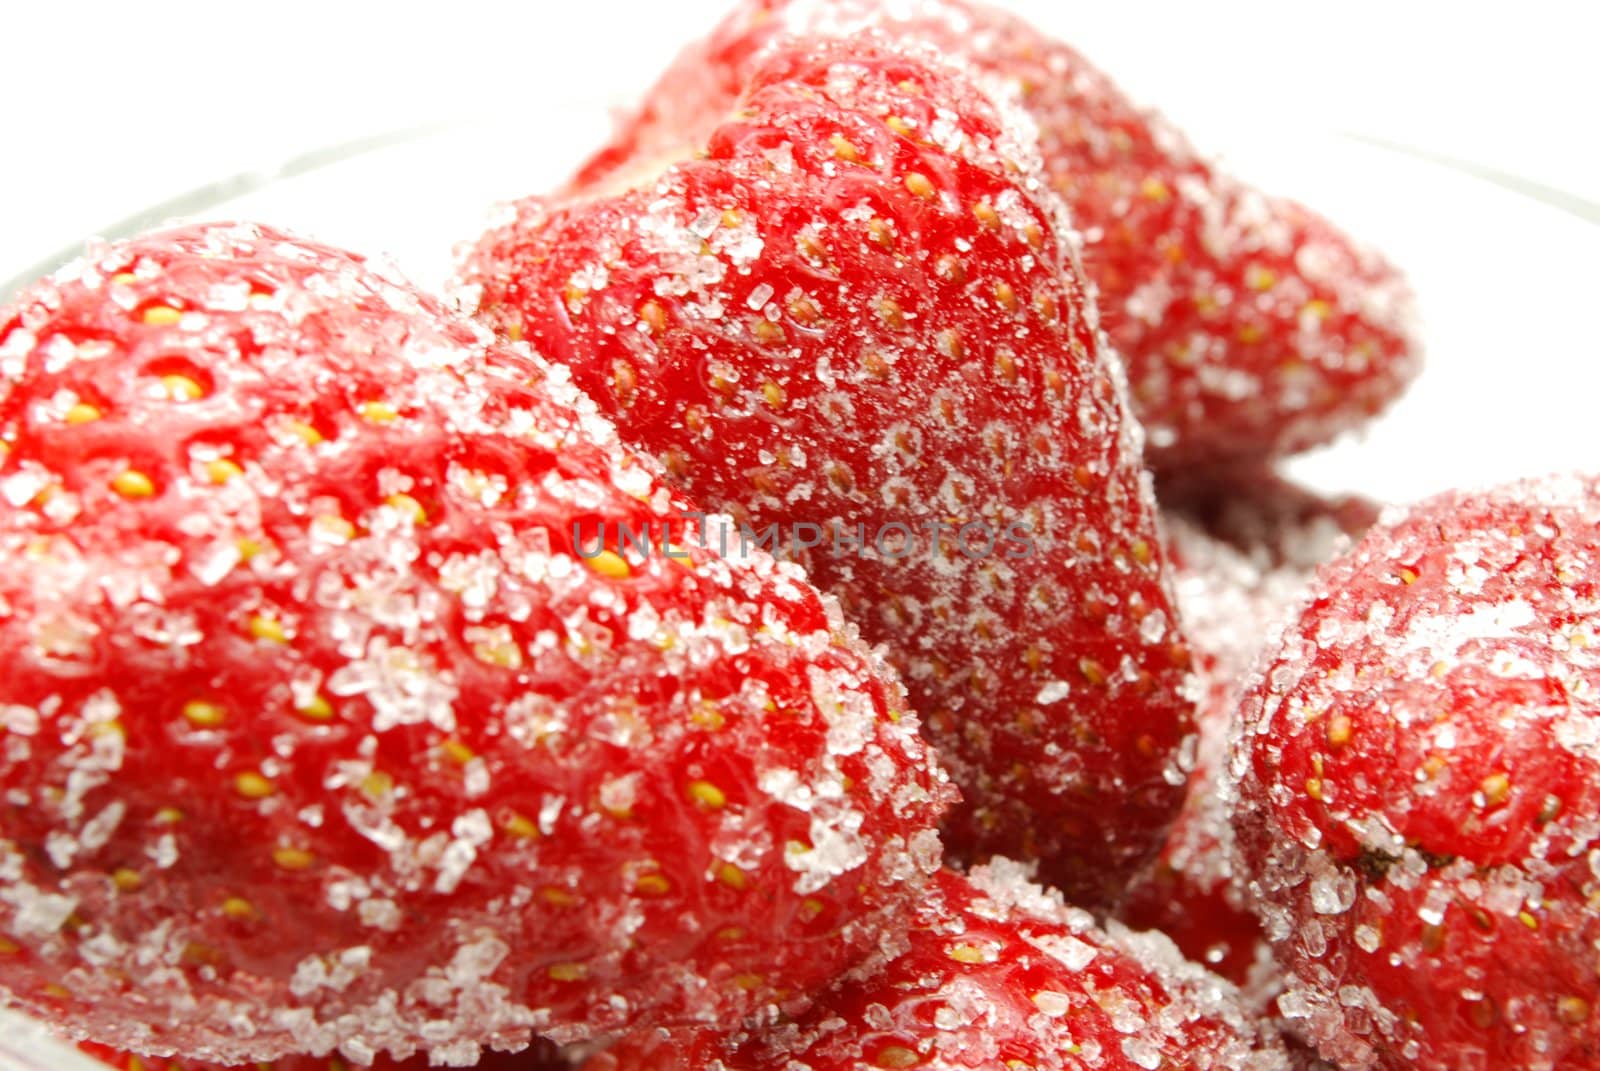 Isolated Tasty Strawberries with Sugar